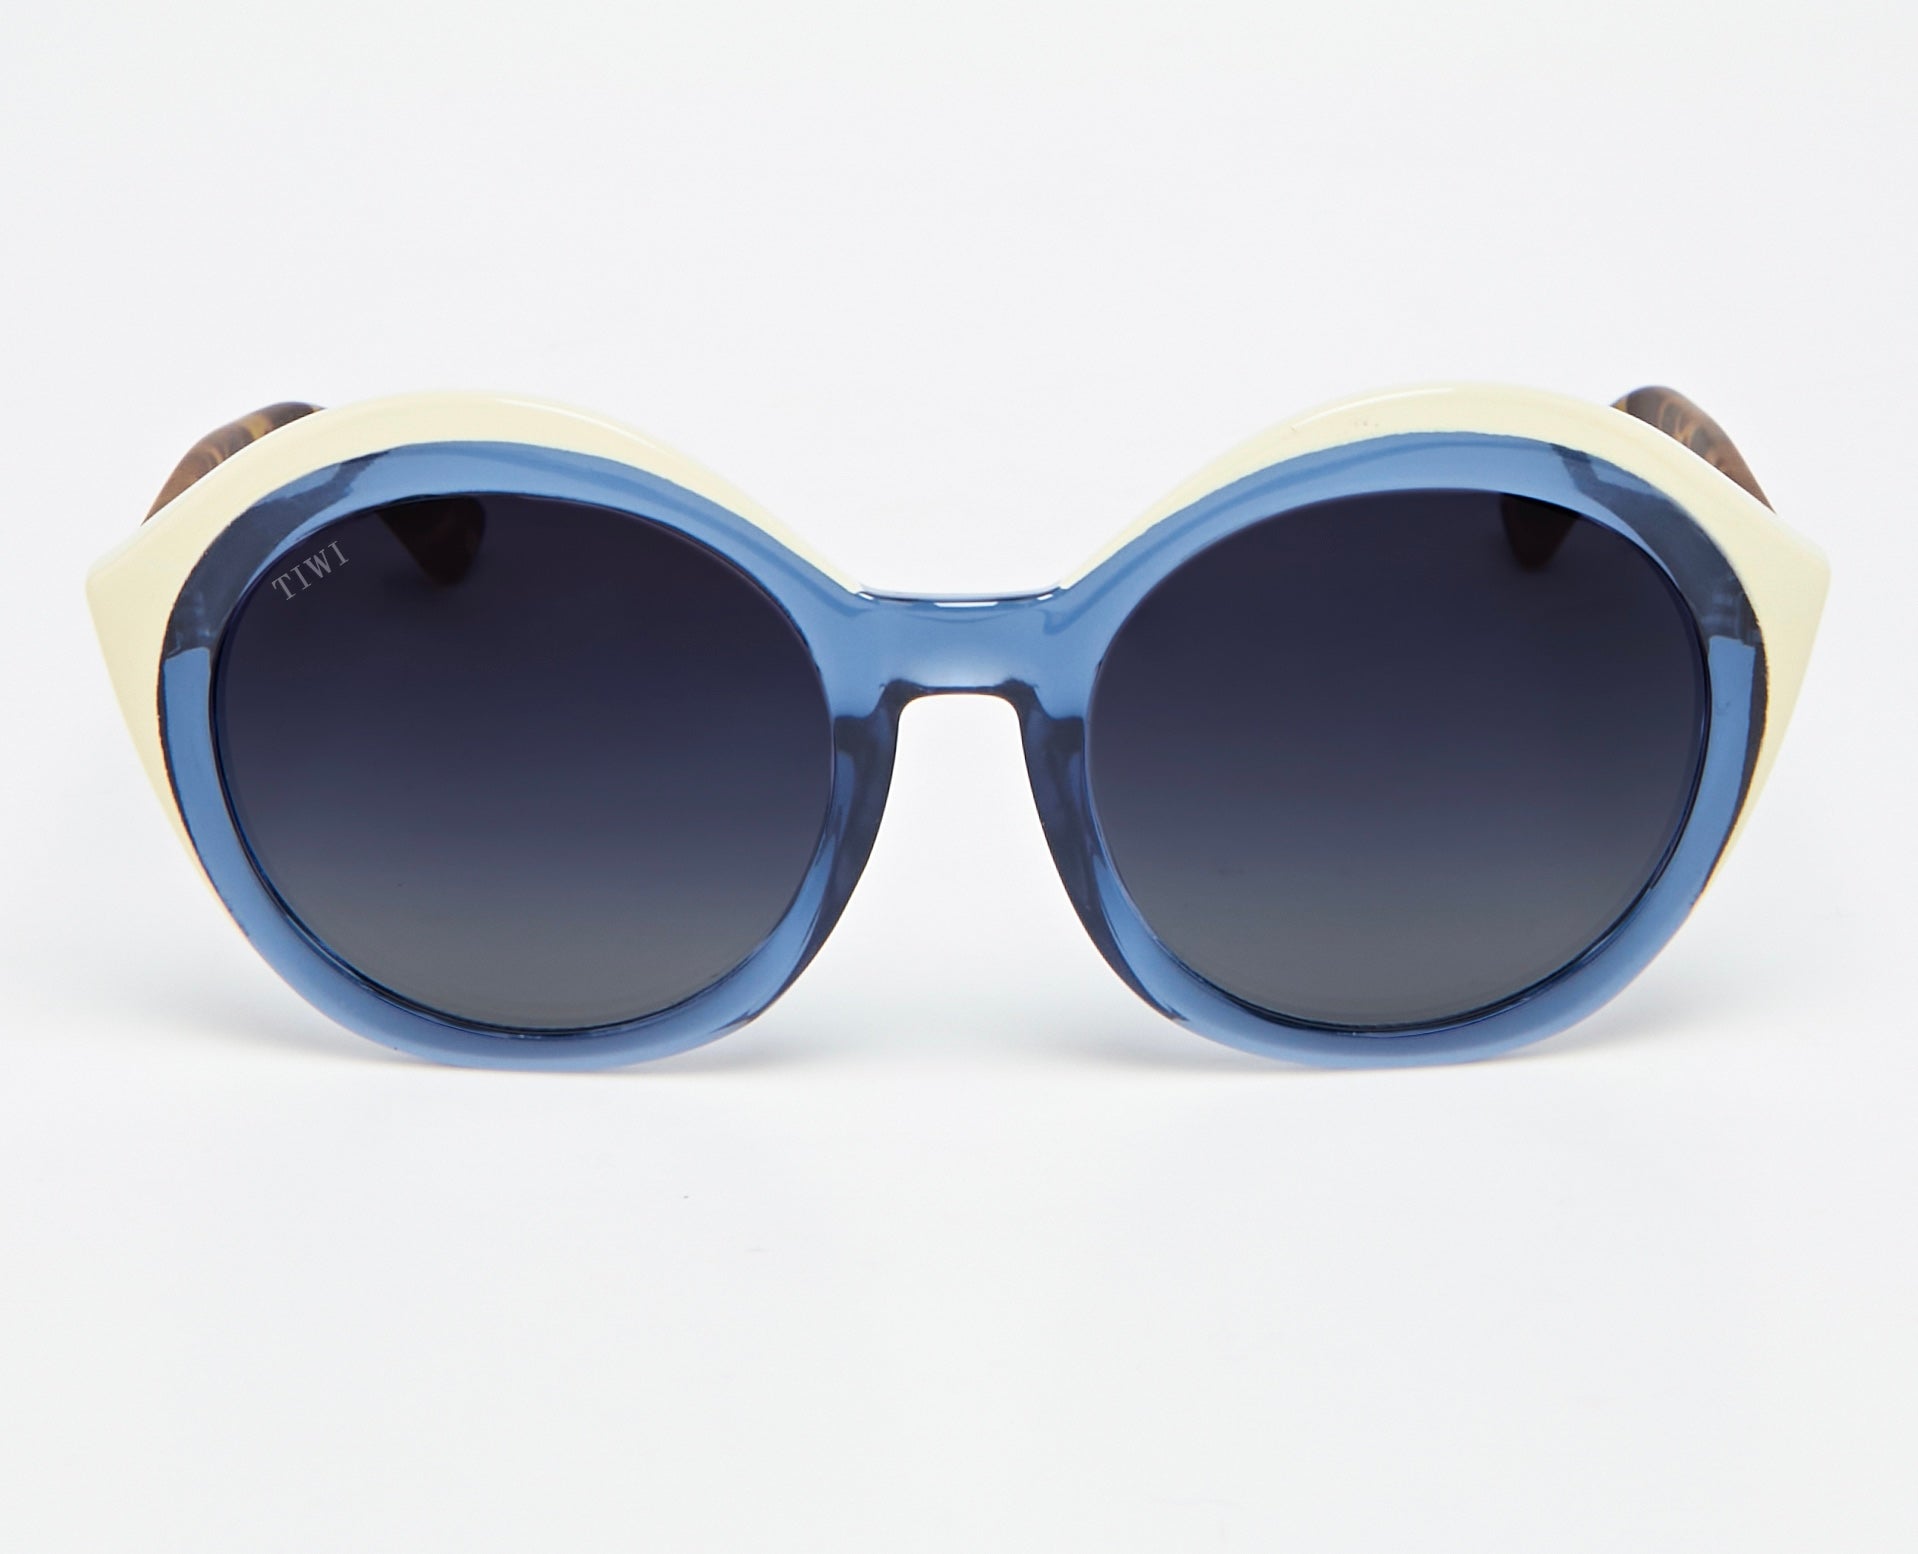 MELVILLE  Available in more colors Bicolor Shiny Ocean Blue/Beige with Blue Gradient Lenses  